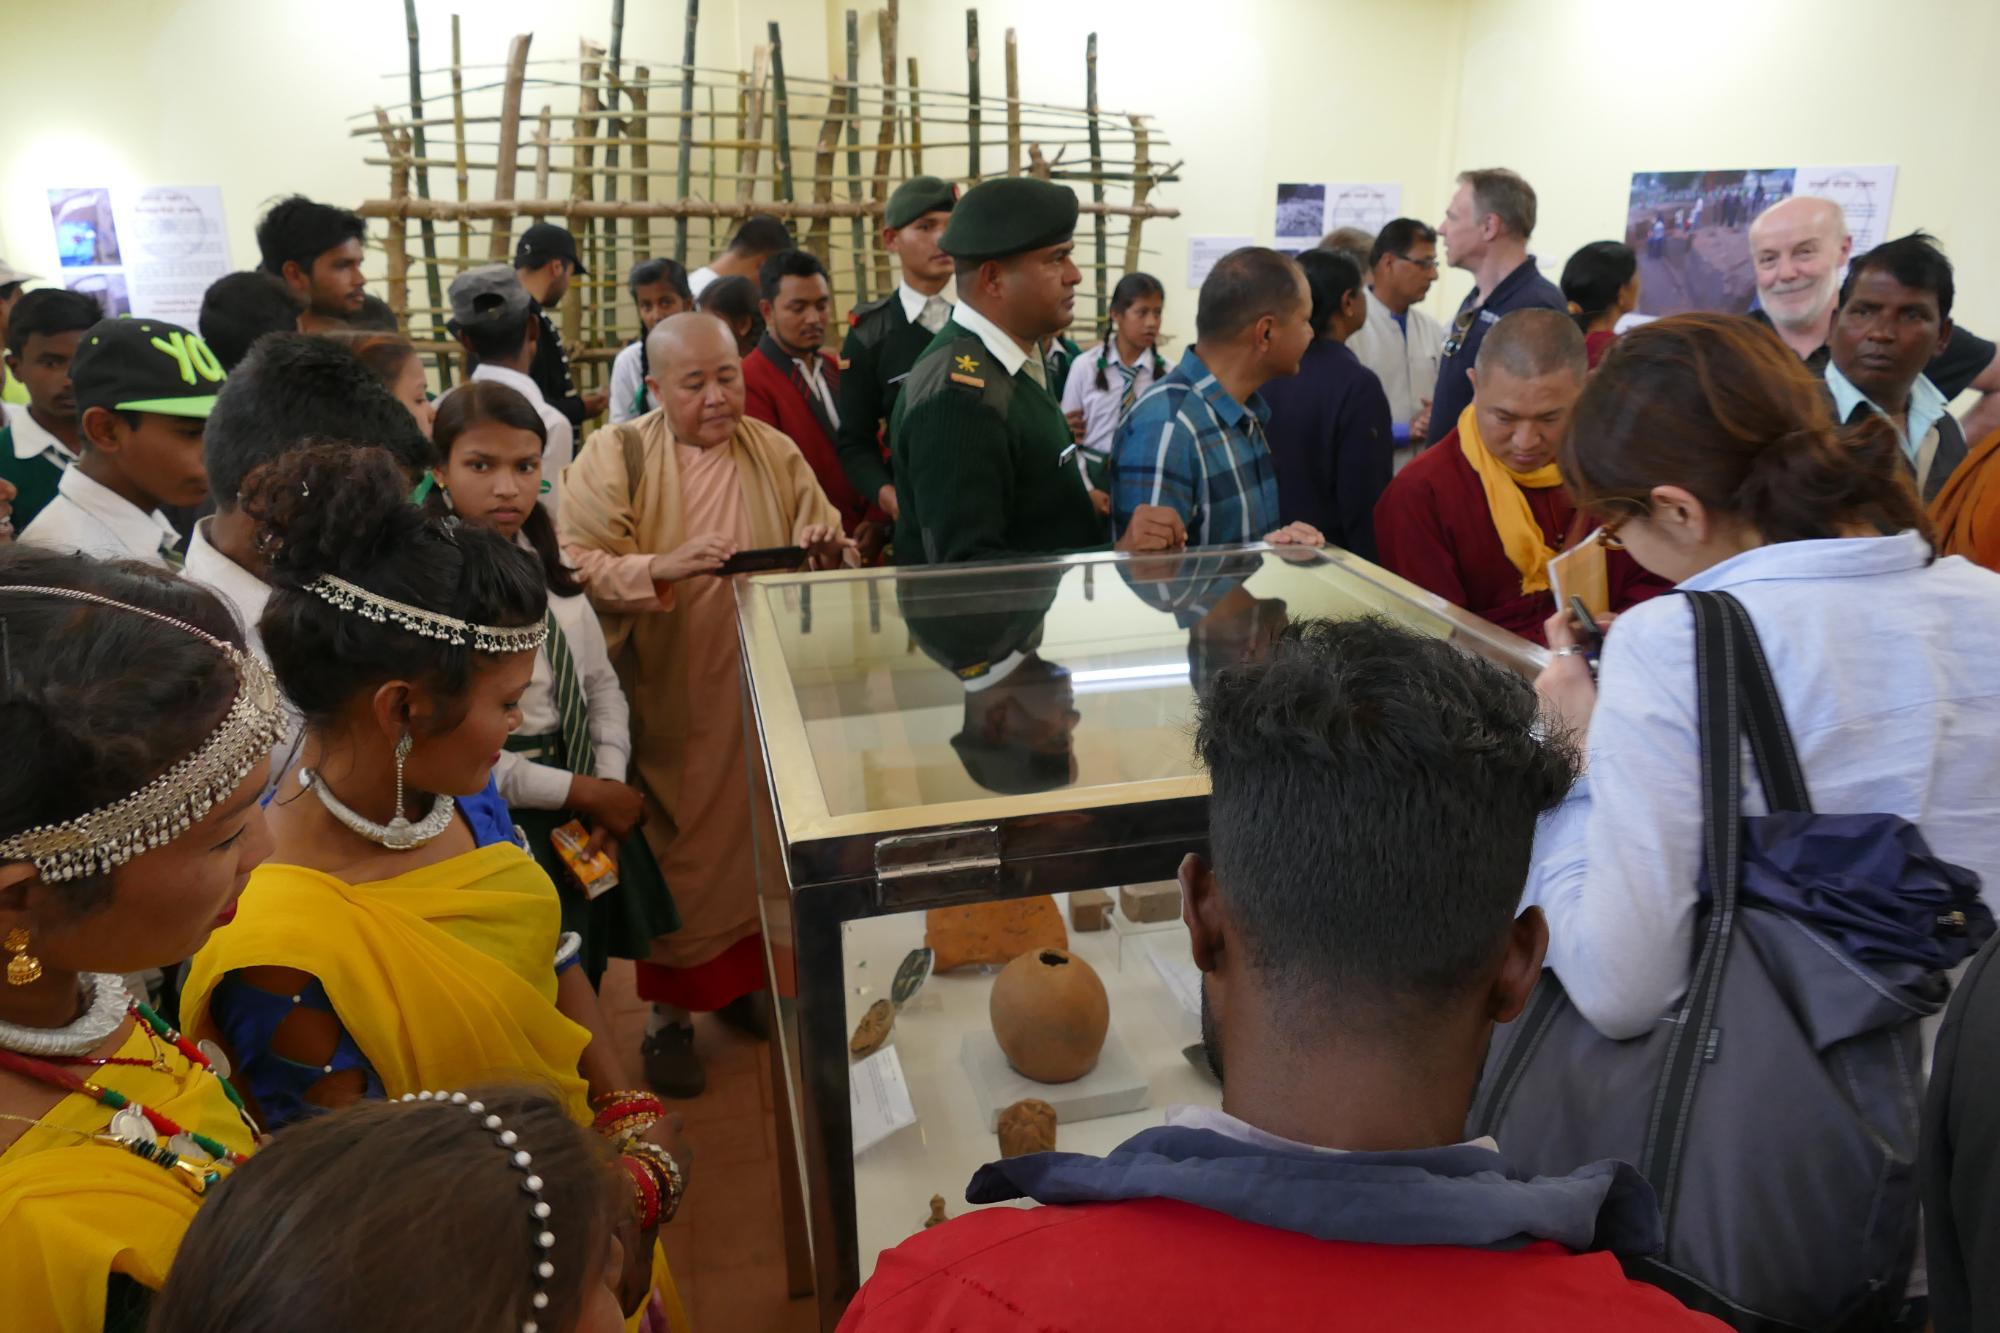 Local residents crowd into the newly opened Kapilavastu Museum